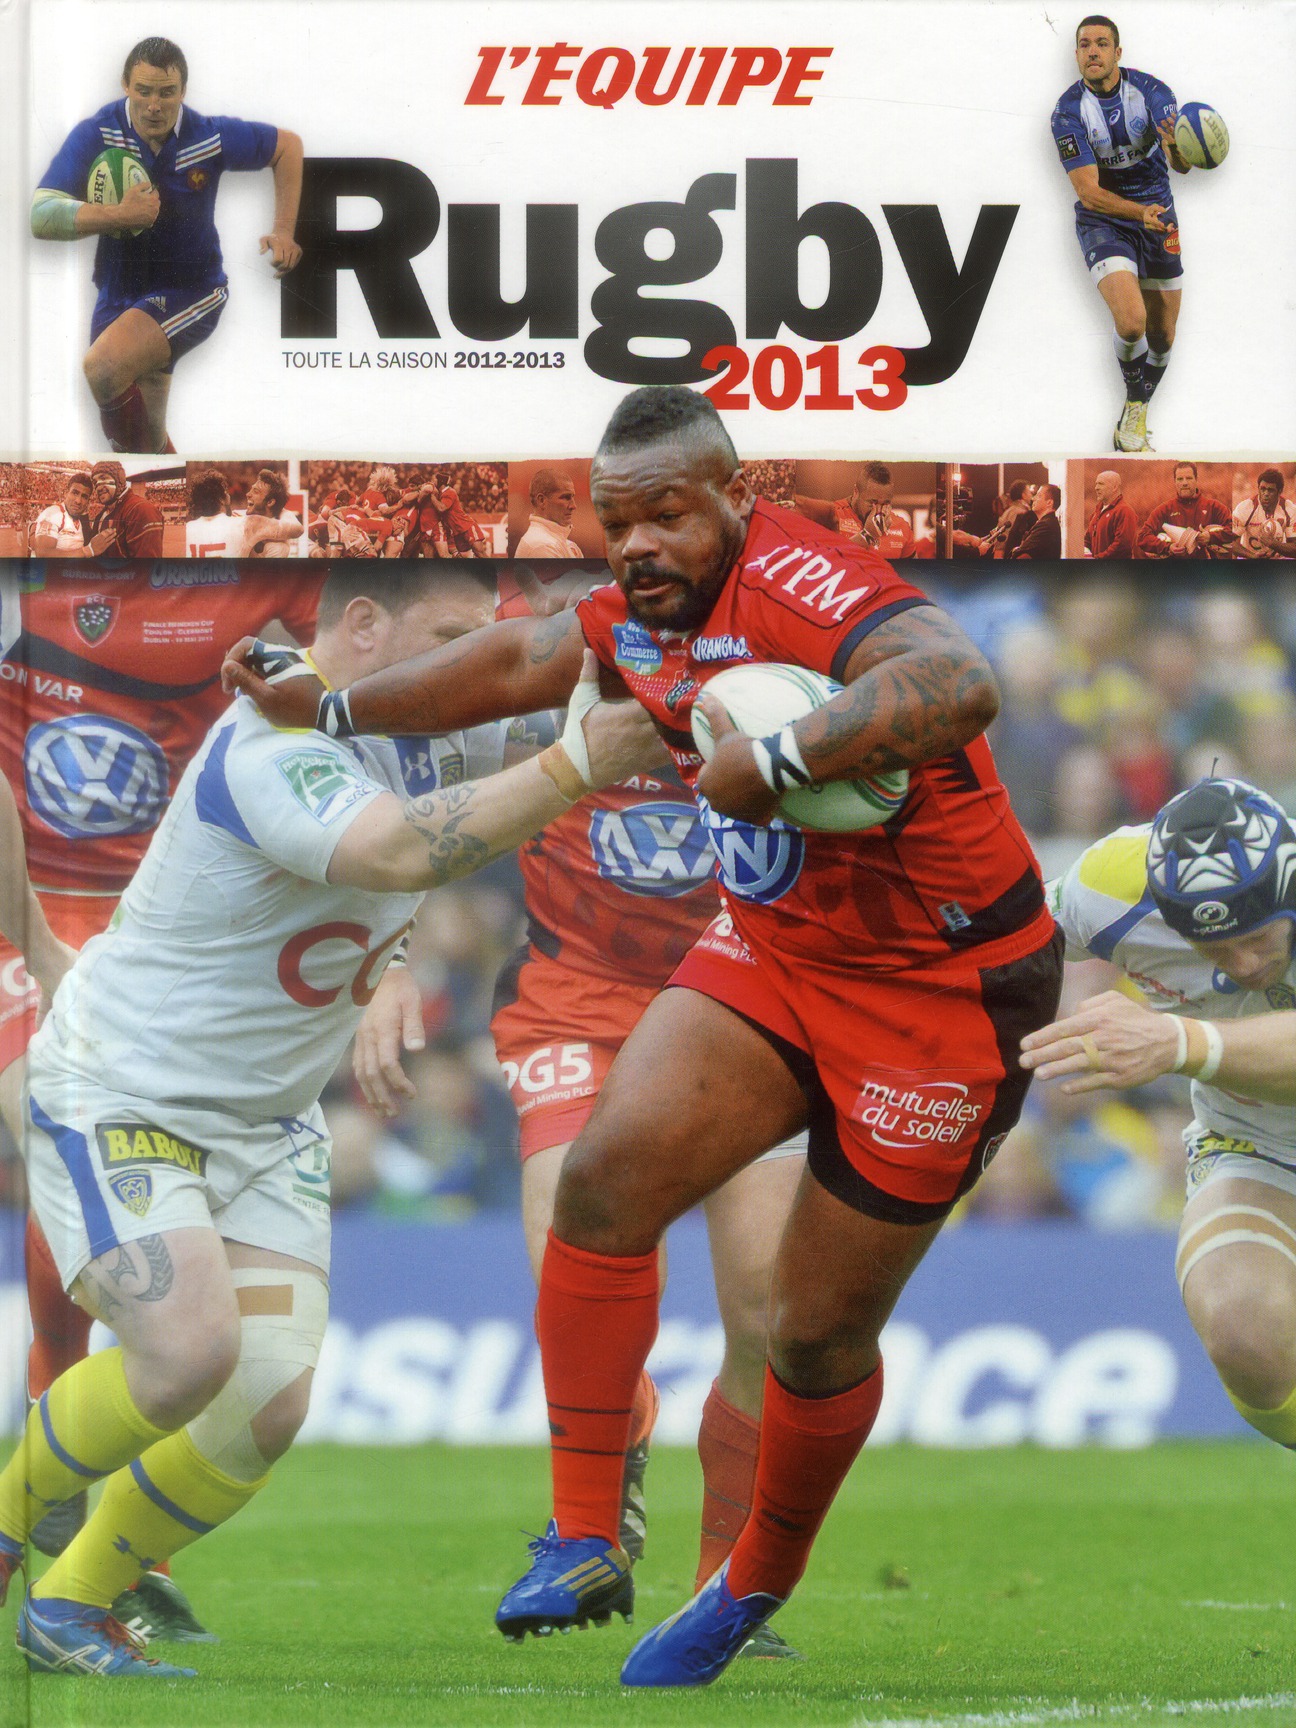 L'EQUIPE RUGBY 2013